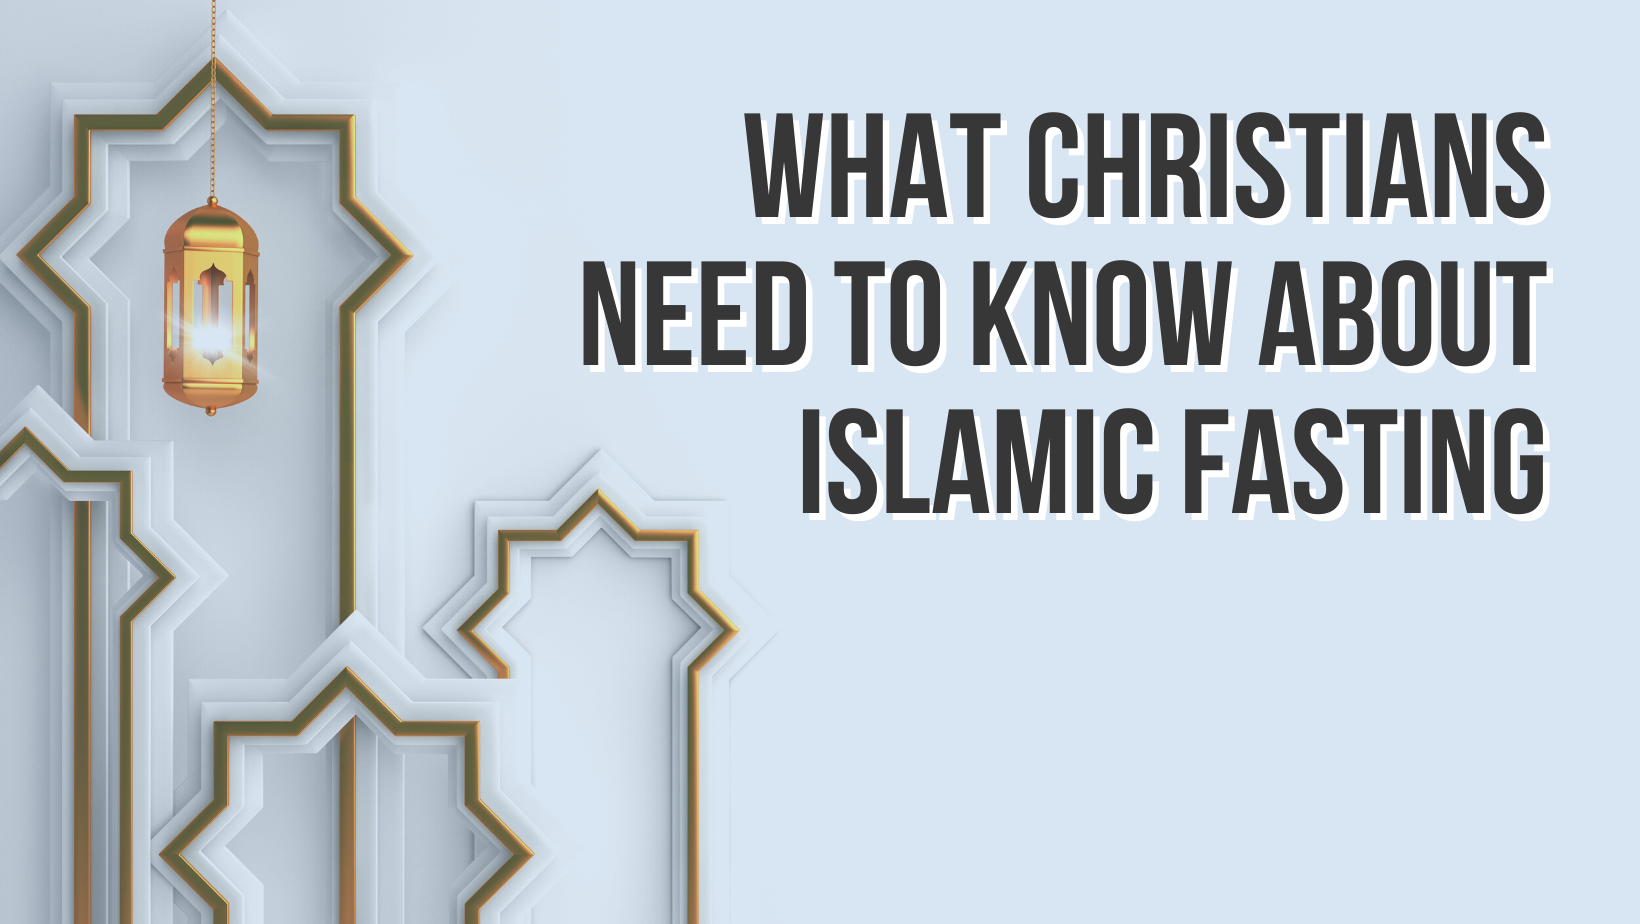 What Christians need to know about Islamic fasting